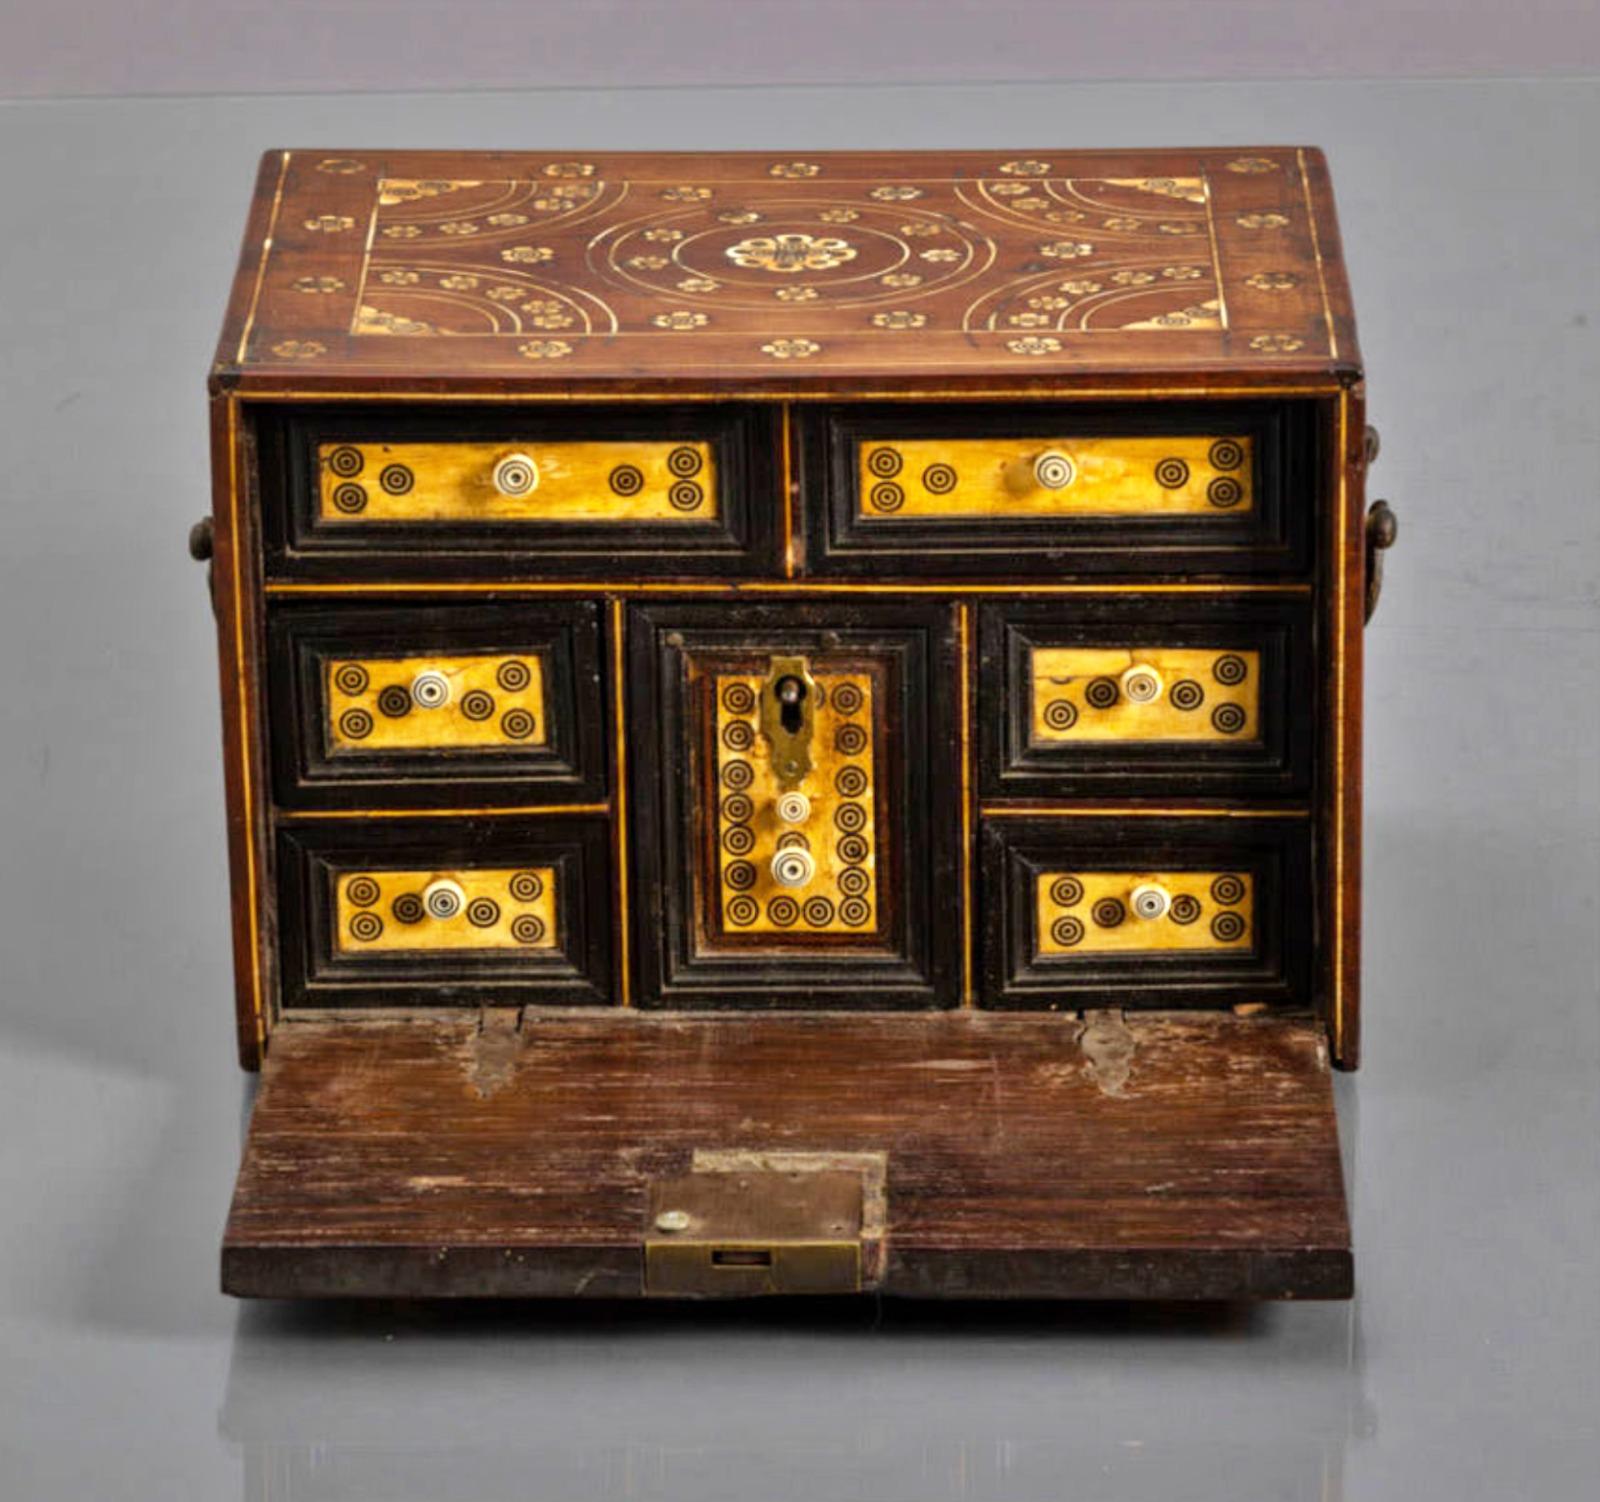 Hand-Crafted Cabinet/ Counter Indo-Portuguese, 17th Century